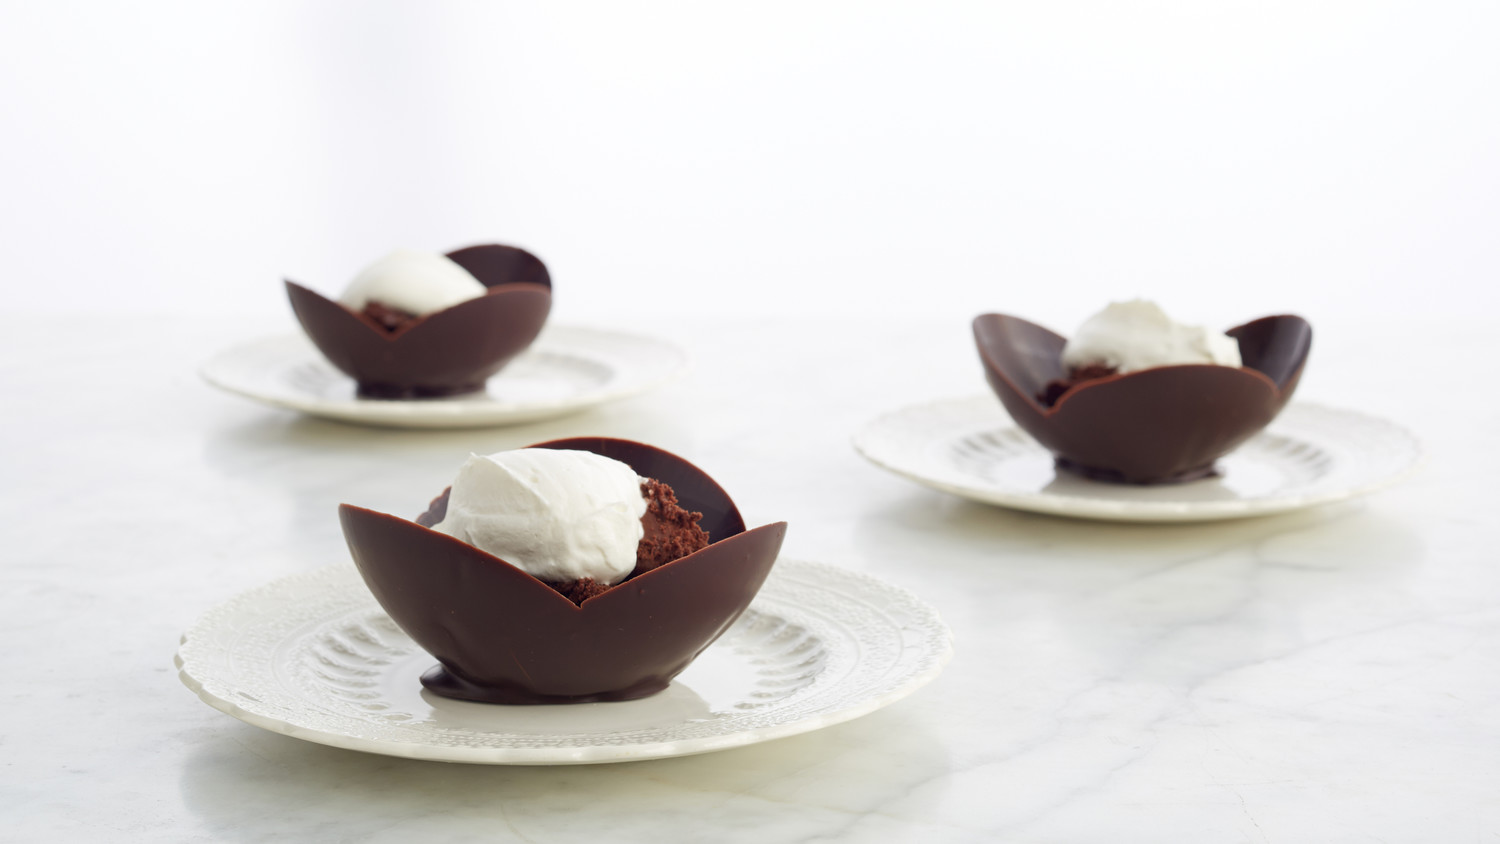 Jacques Torres's Chocolate Bowls1500 x 844